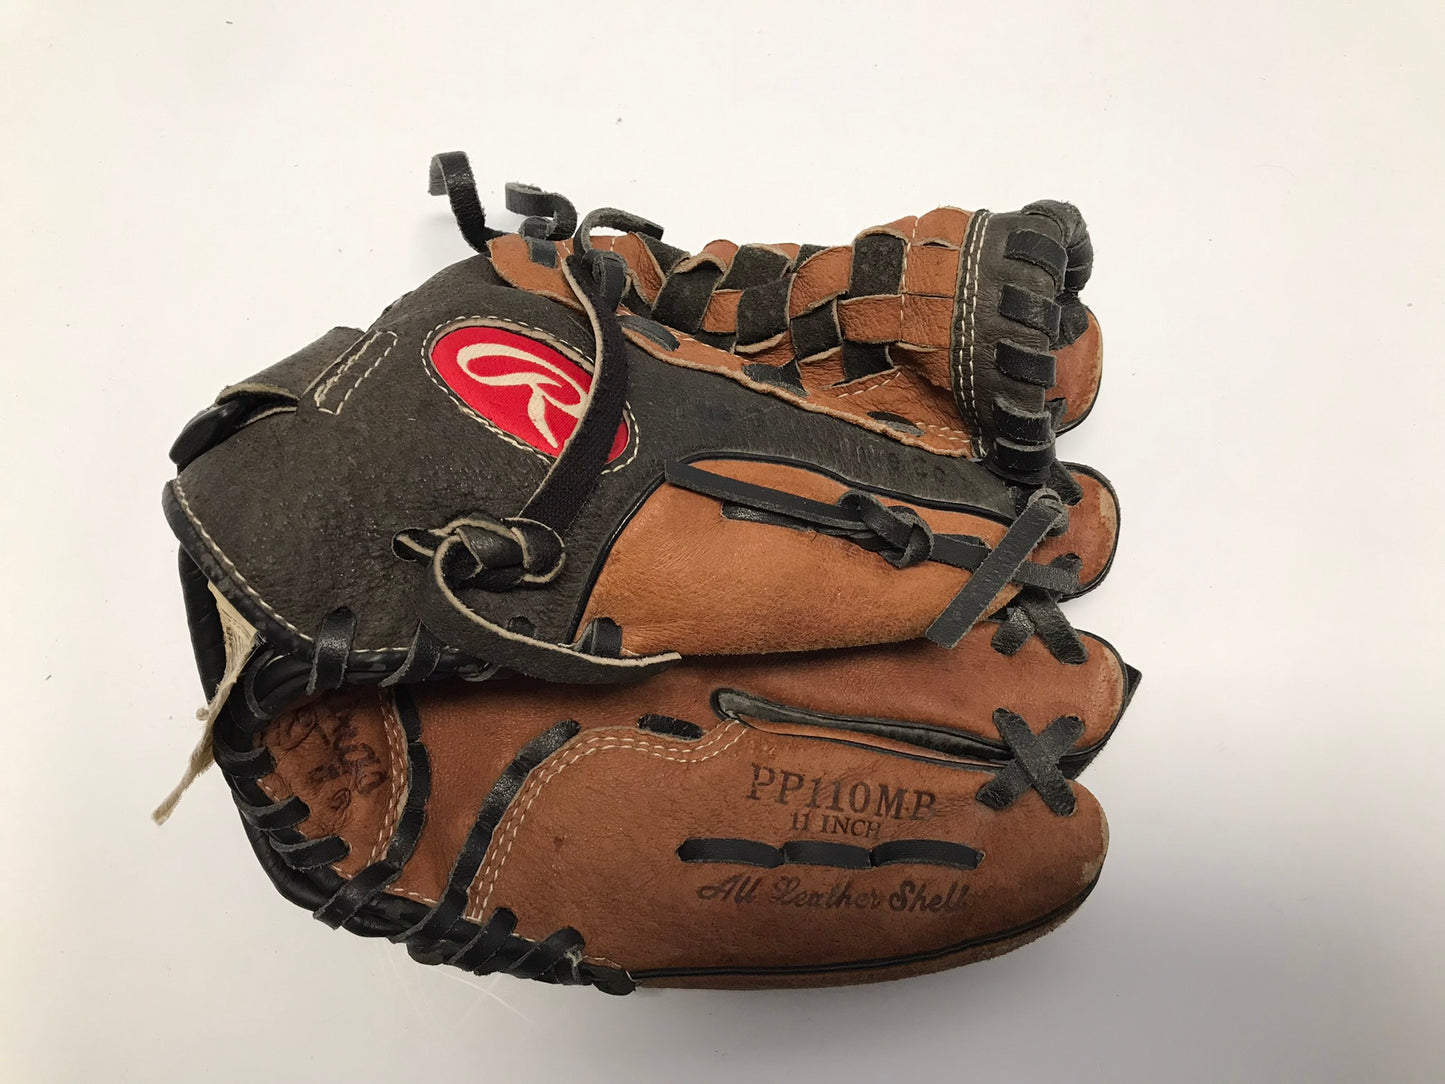 Baseball Glove Child Size 11 inch Rawlings Savage Soft Brown Black Leather Fits on Left Hand